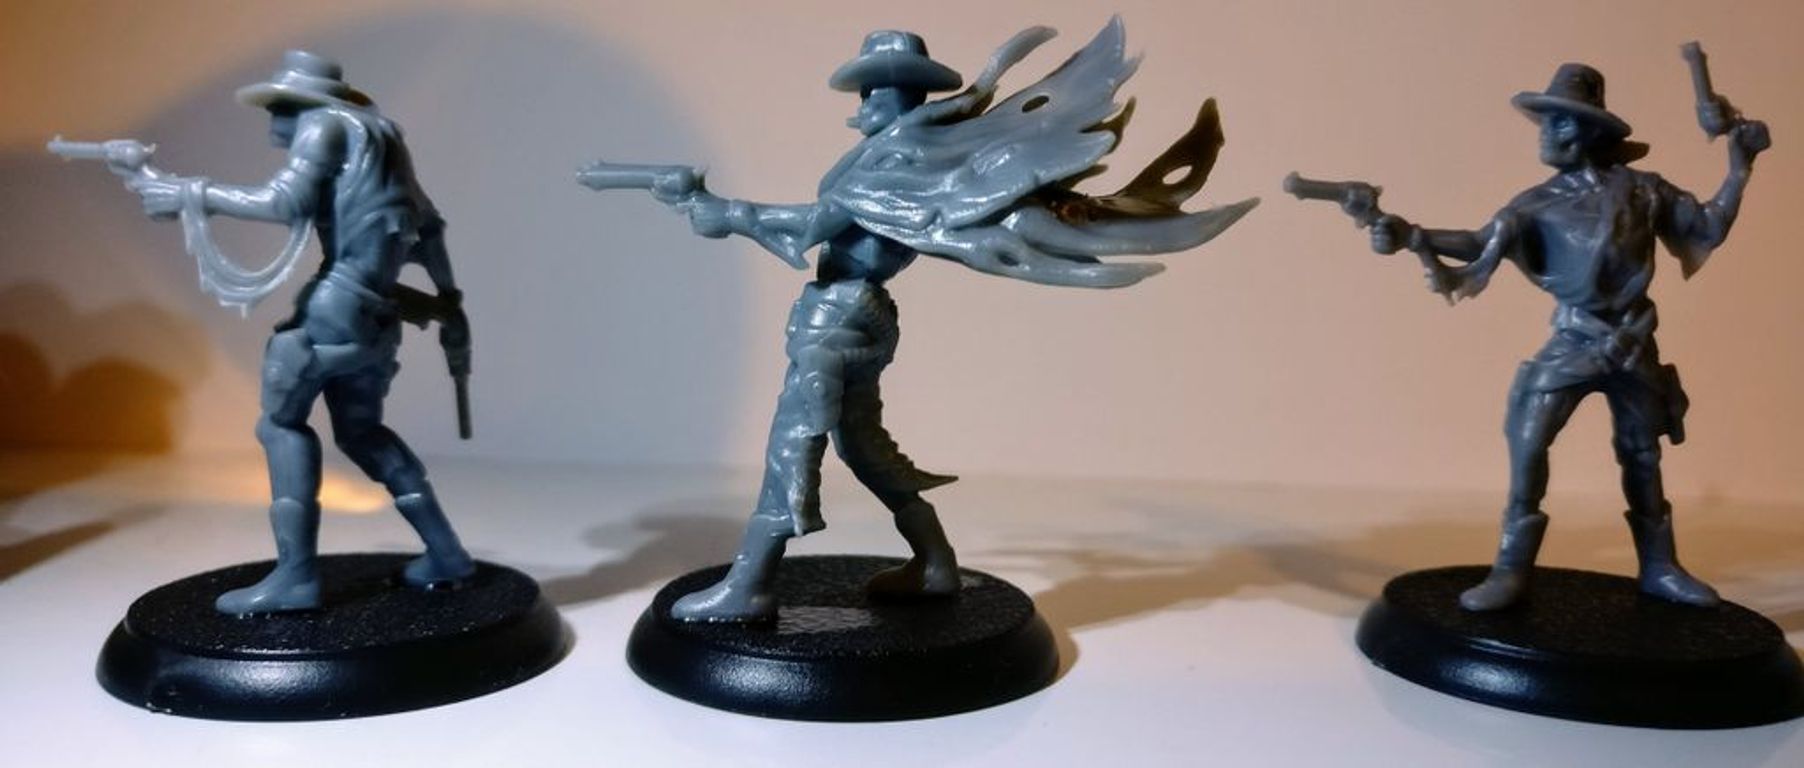 Shadows of Brimstone: Undead Outlaws Deluxe Enemy Pack miniatures